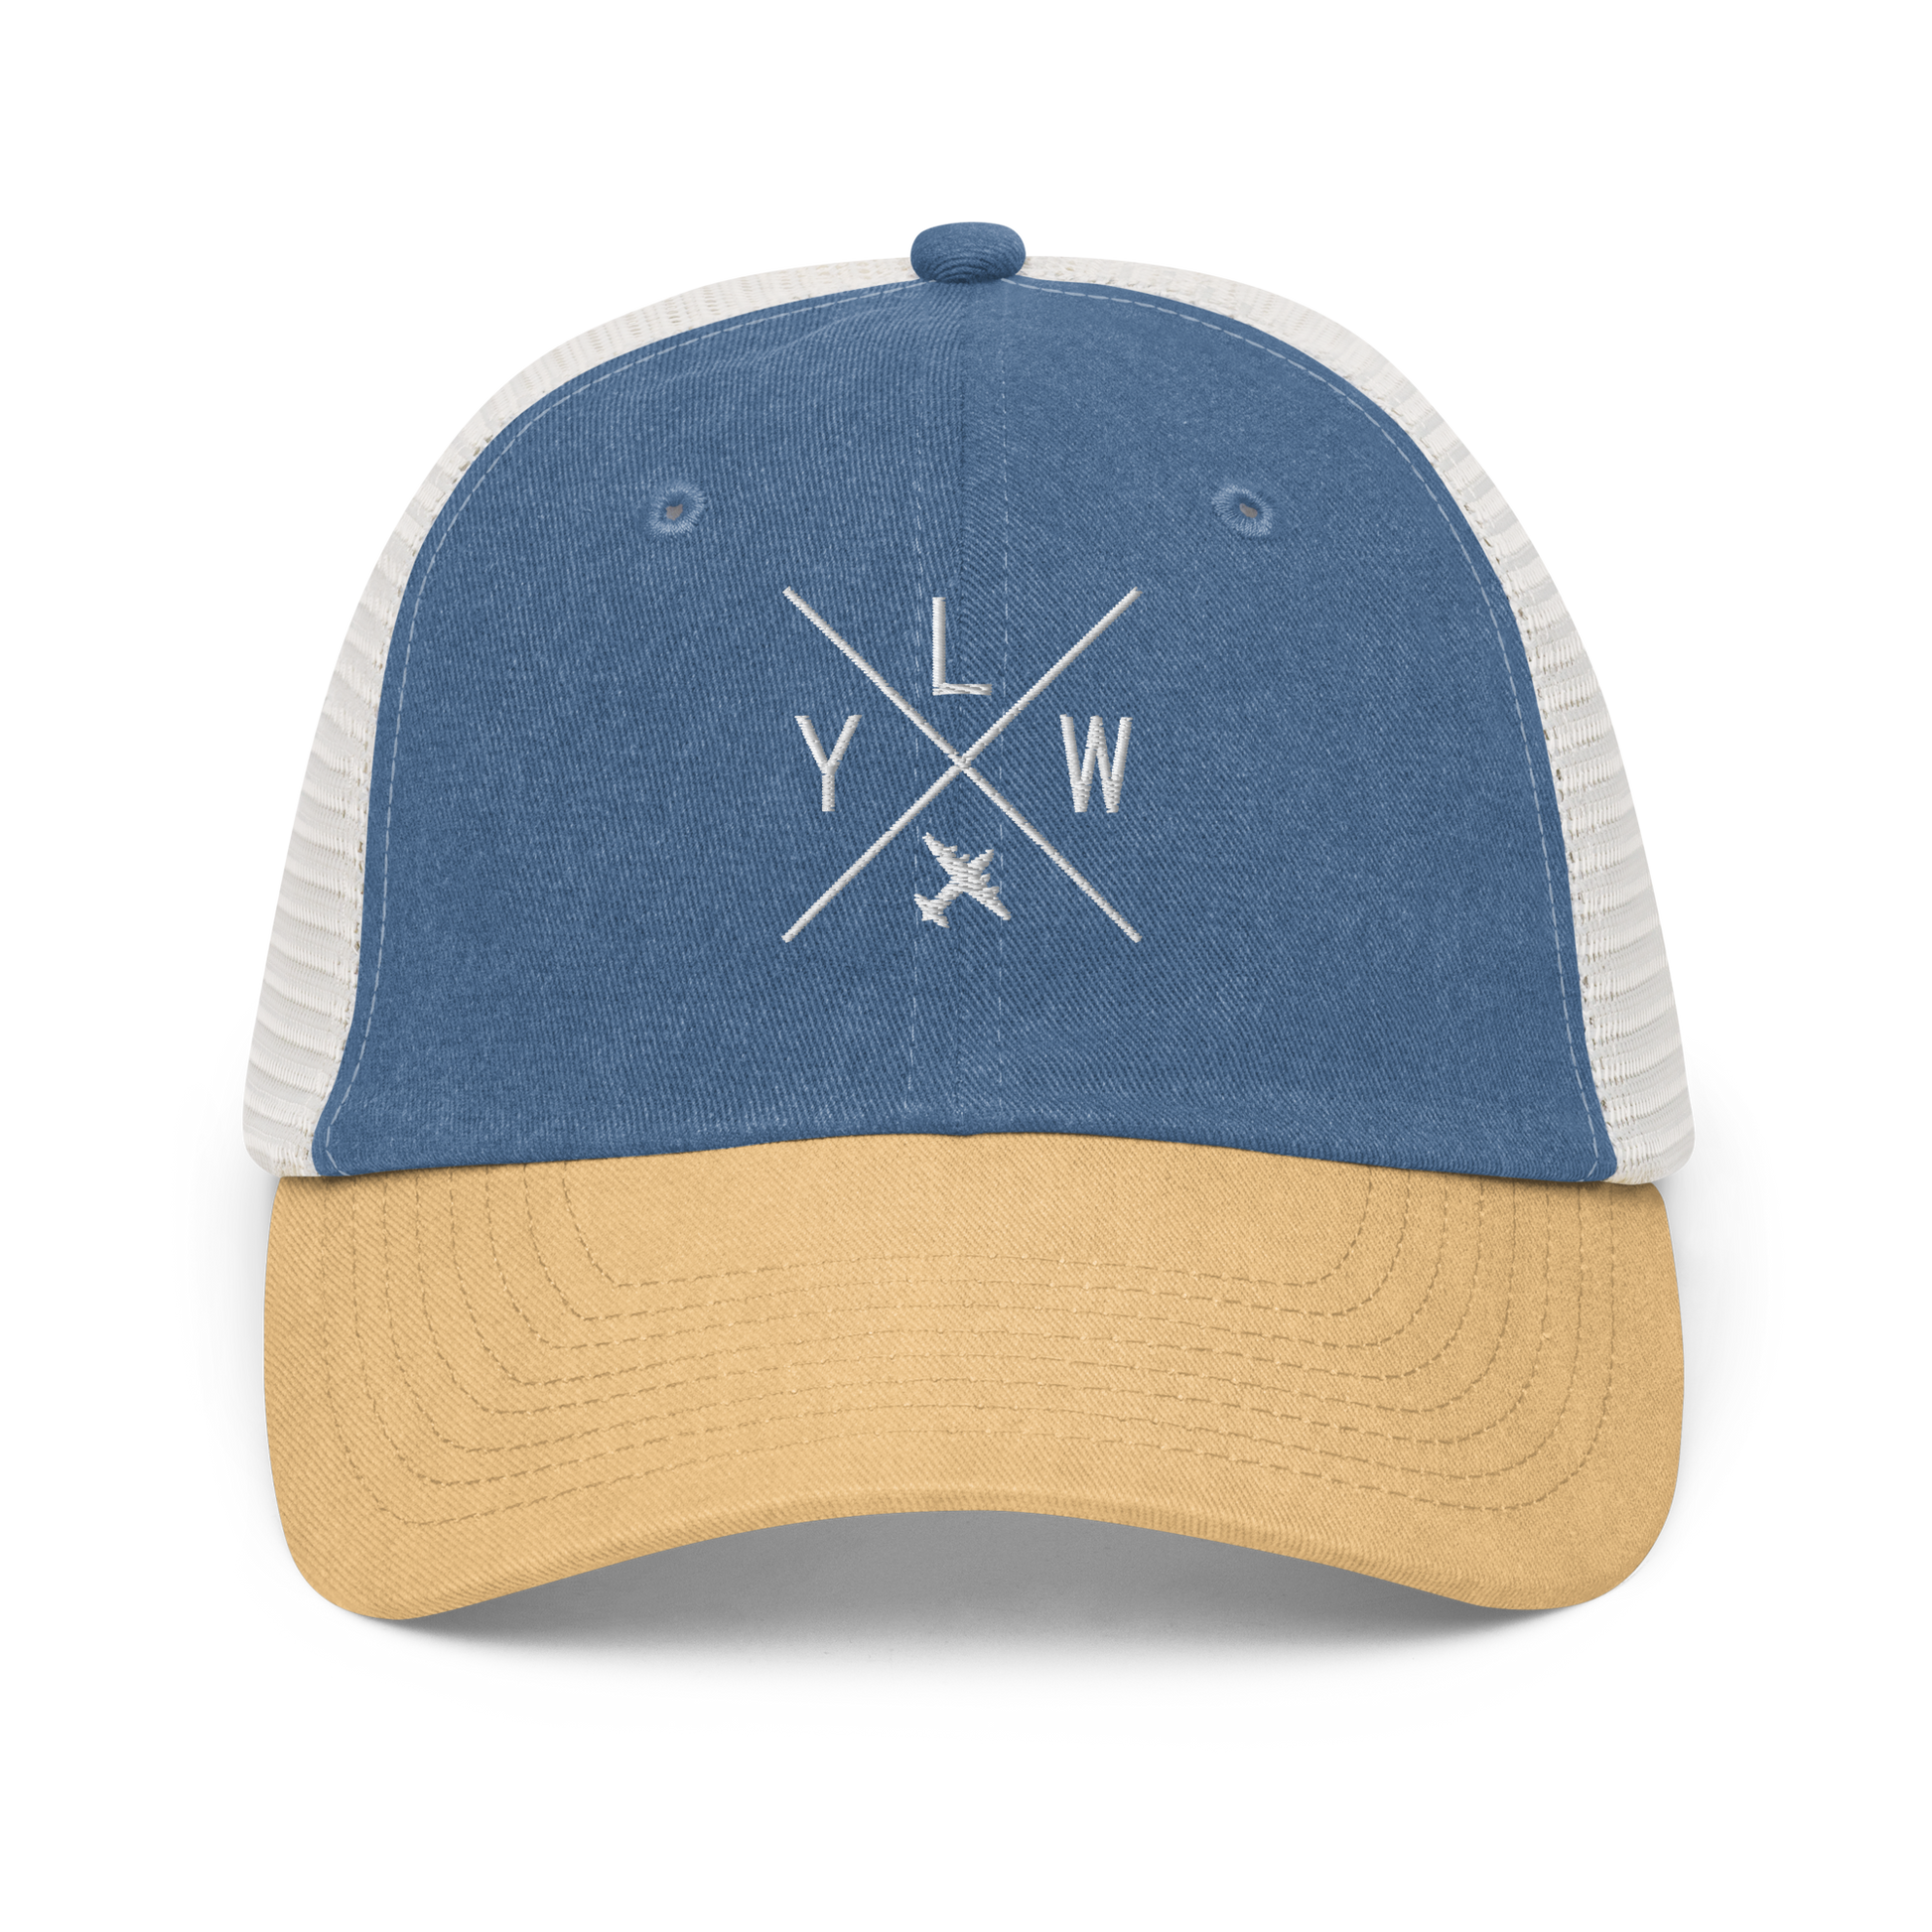 YHM Designs - YLW Kelowna Pigment-Dyed Trucker Cap - Crossed-X Design with Airport Code and Vintage Propliner - White Embroidery - Image 01